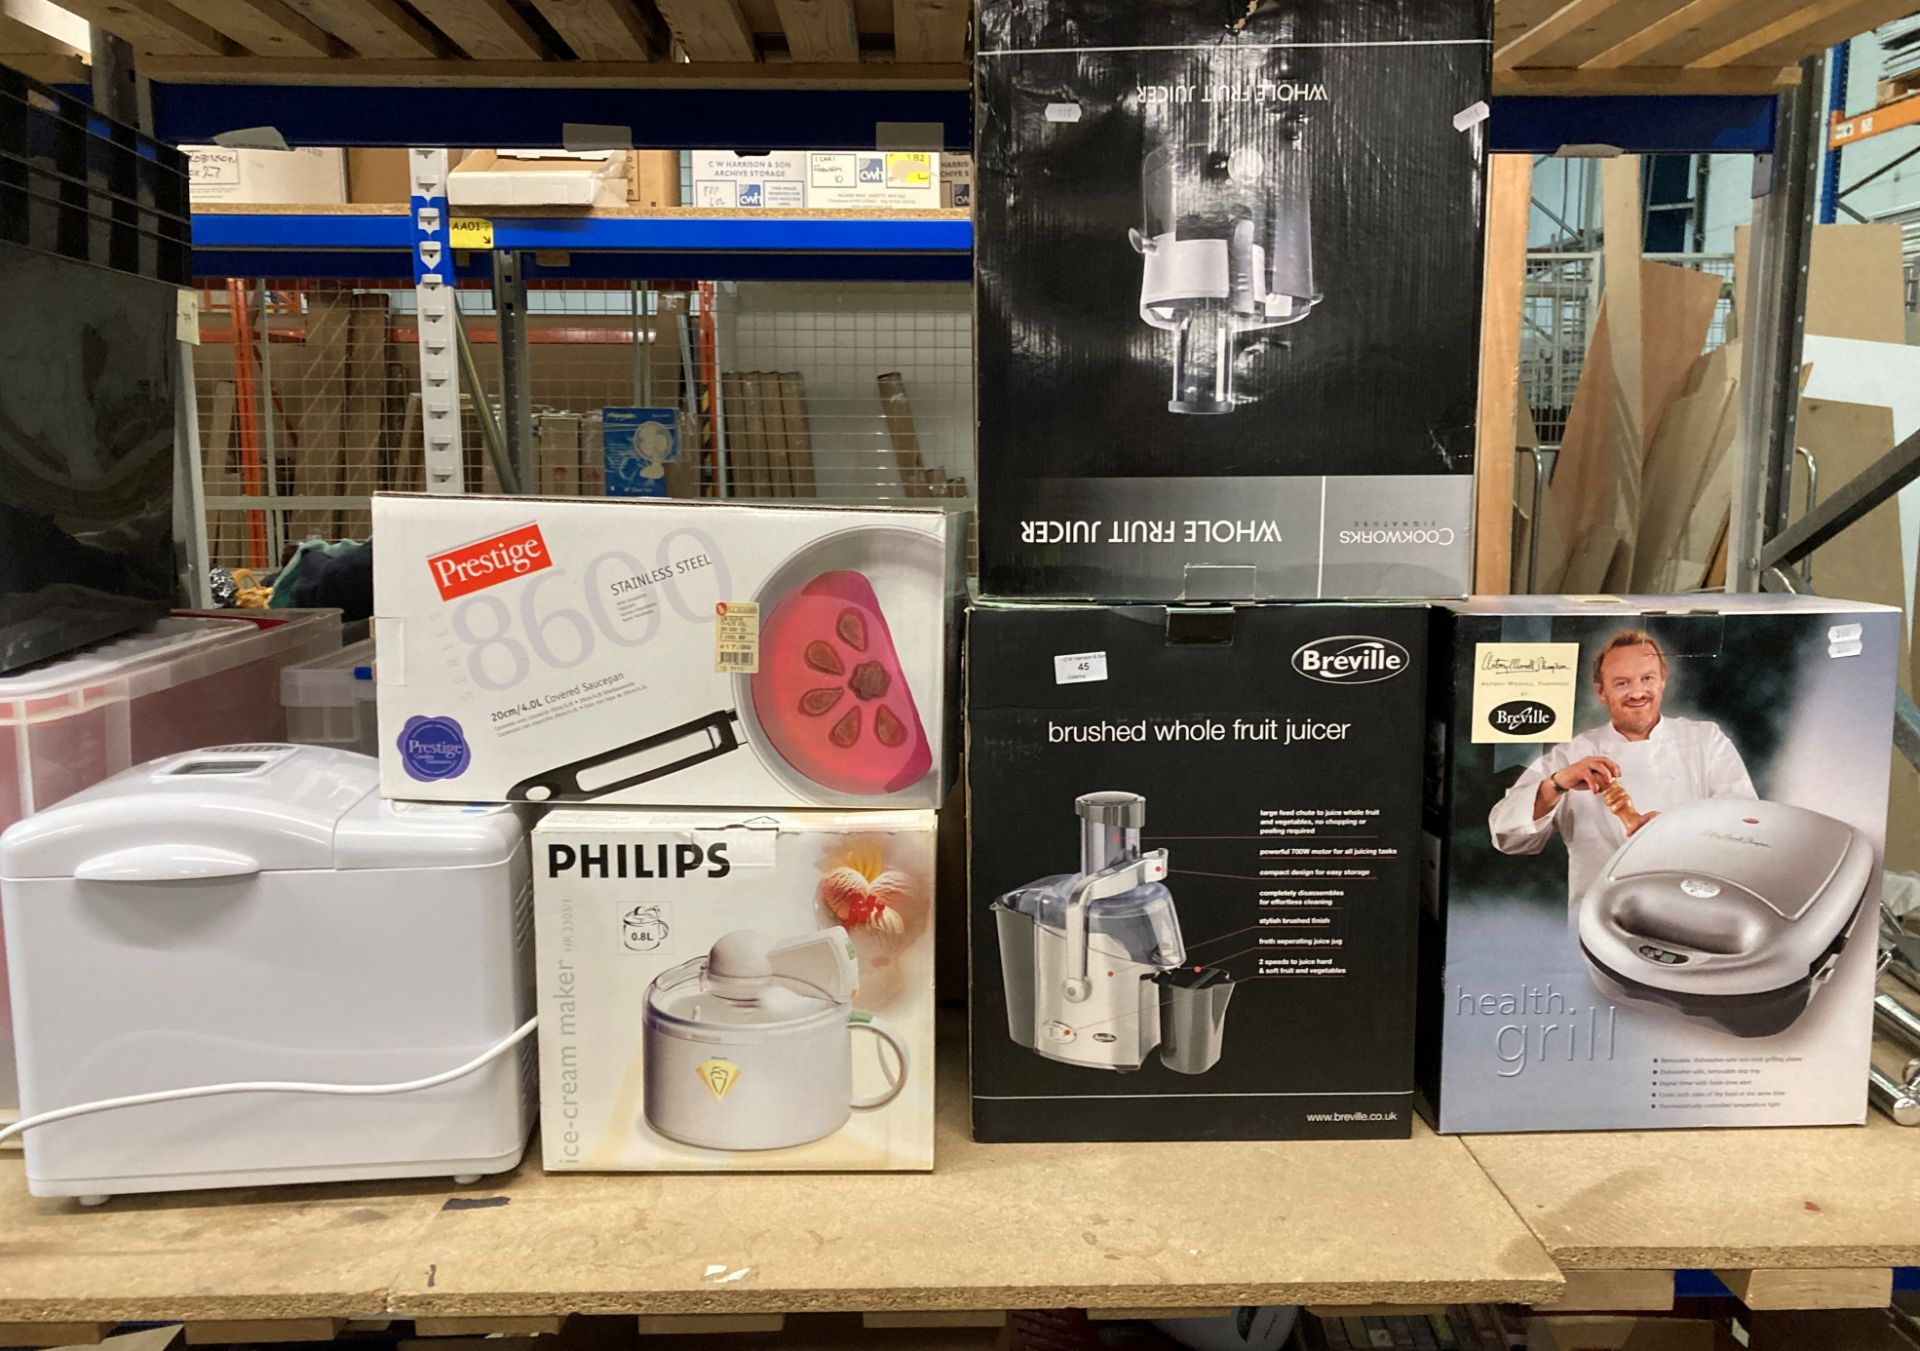 Two whole fruit juicers by Breville and Cookworks, Breville health grill, Phillips ice cream maker,